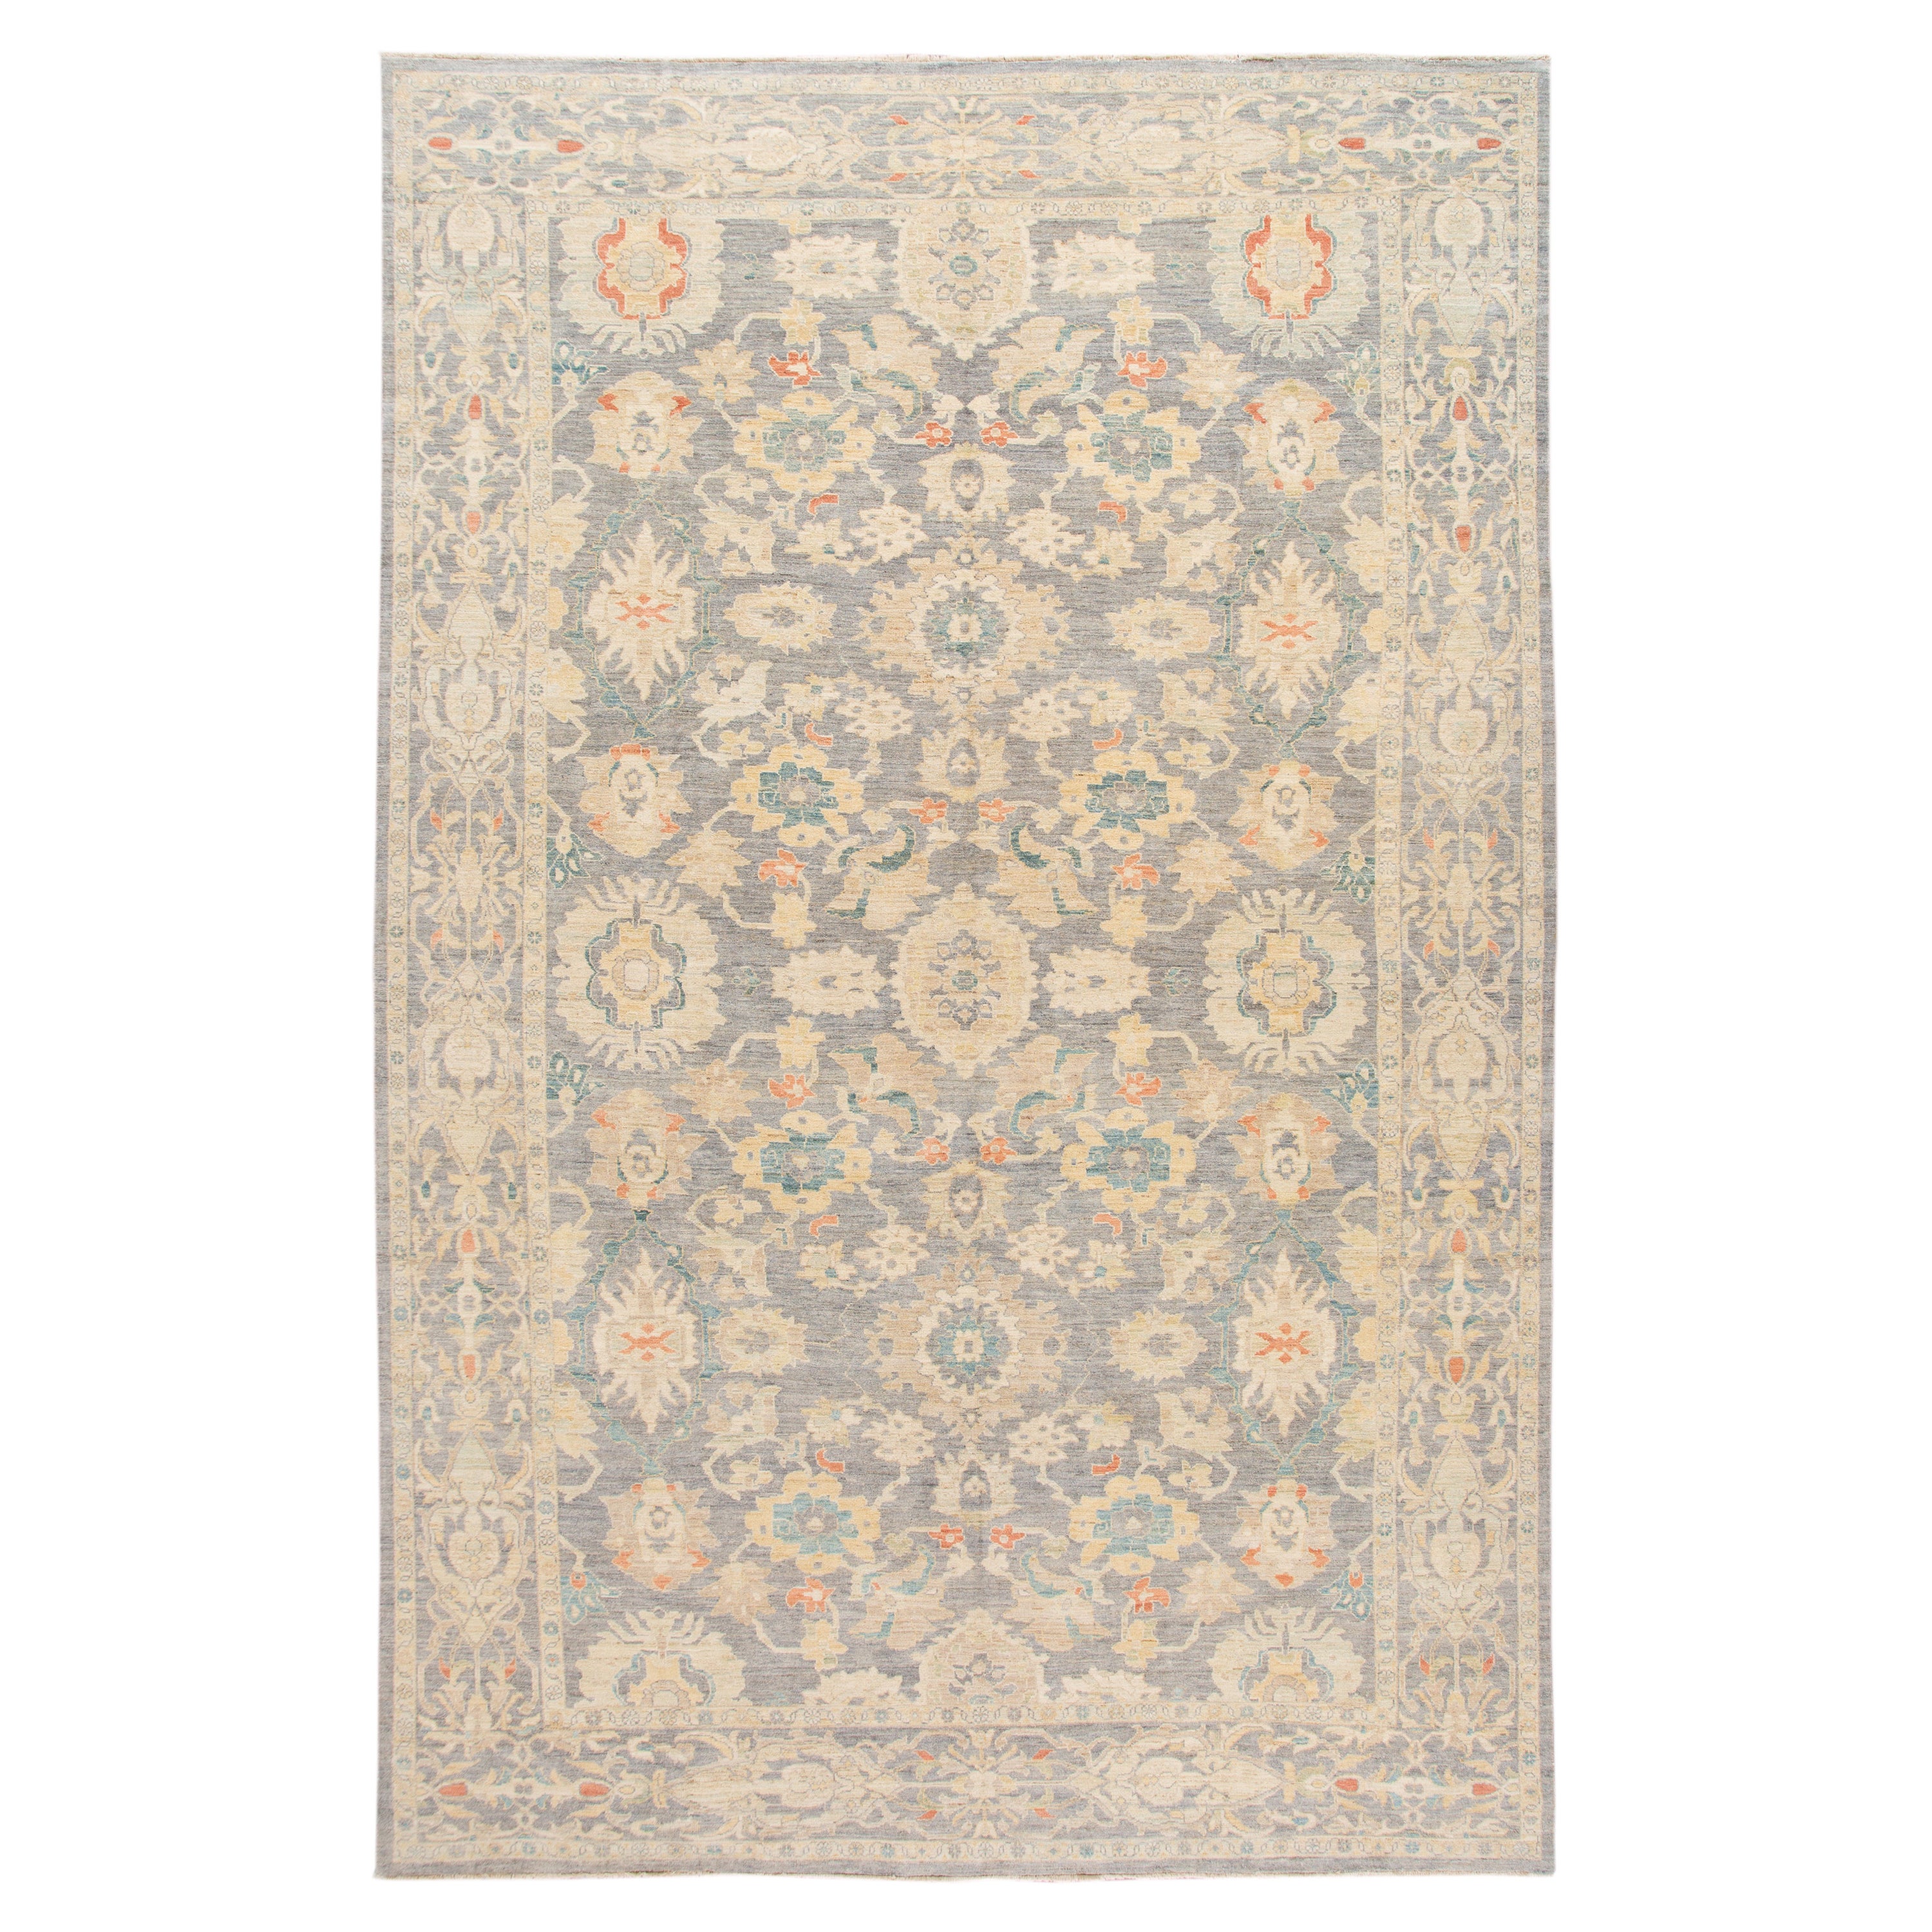 Handmade Gray Sultanabad Wool Rug Oversize Floral All-Over Design